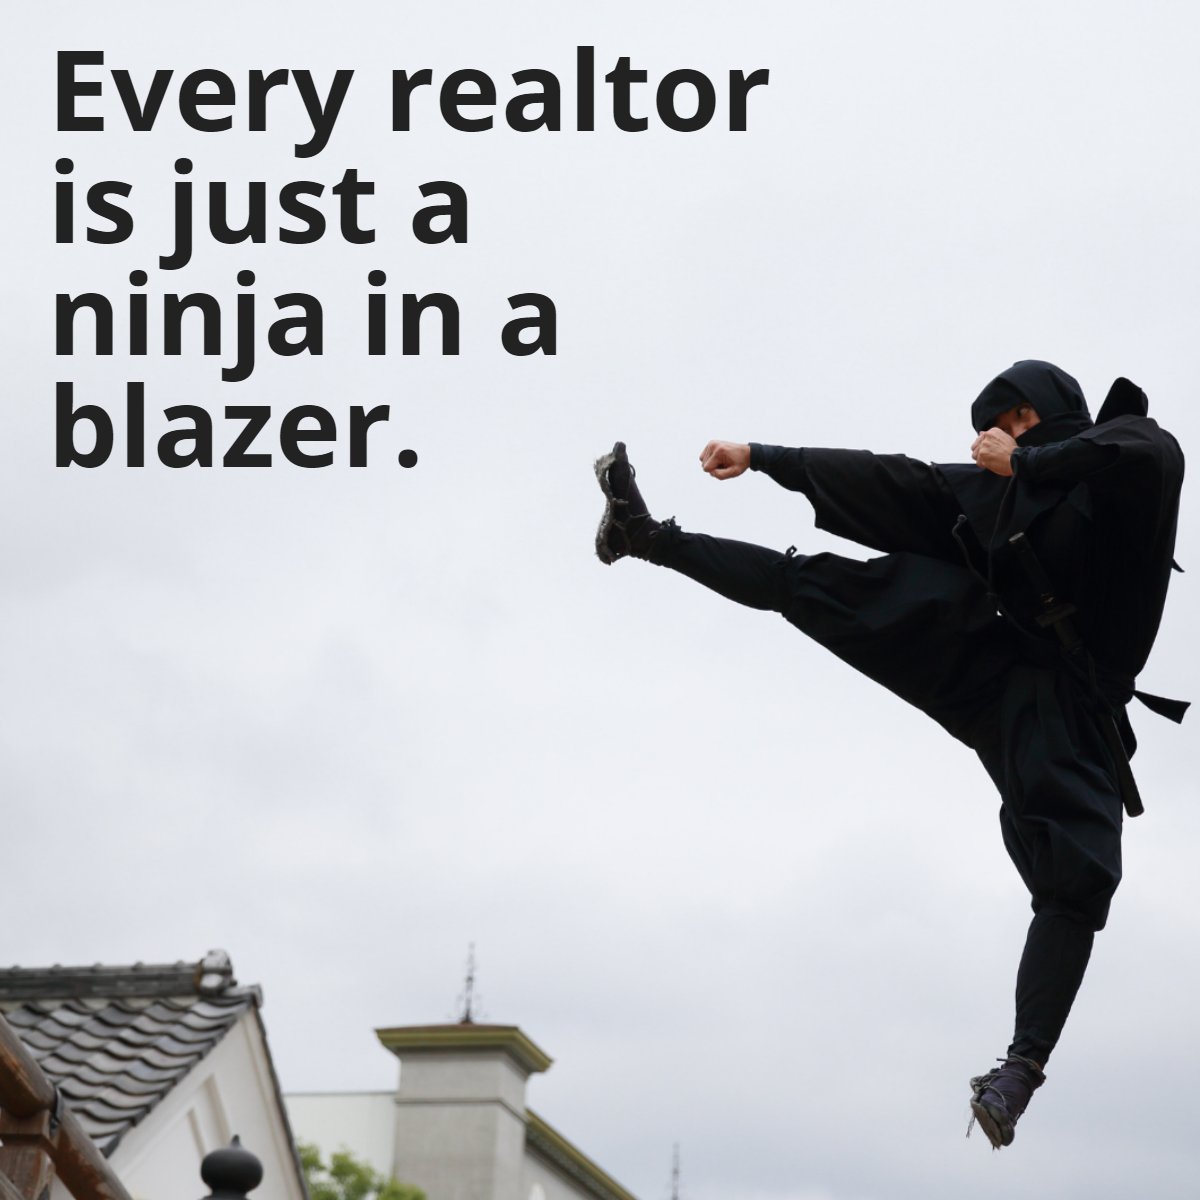 Being a Realtor is a hard job, but I'm glad I do it. 💯

#homeselling #sellingyourhome #realestateinvestment #realestatemarket #realtorlifestyle #realtorlife
 #yourrealtorforlife